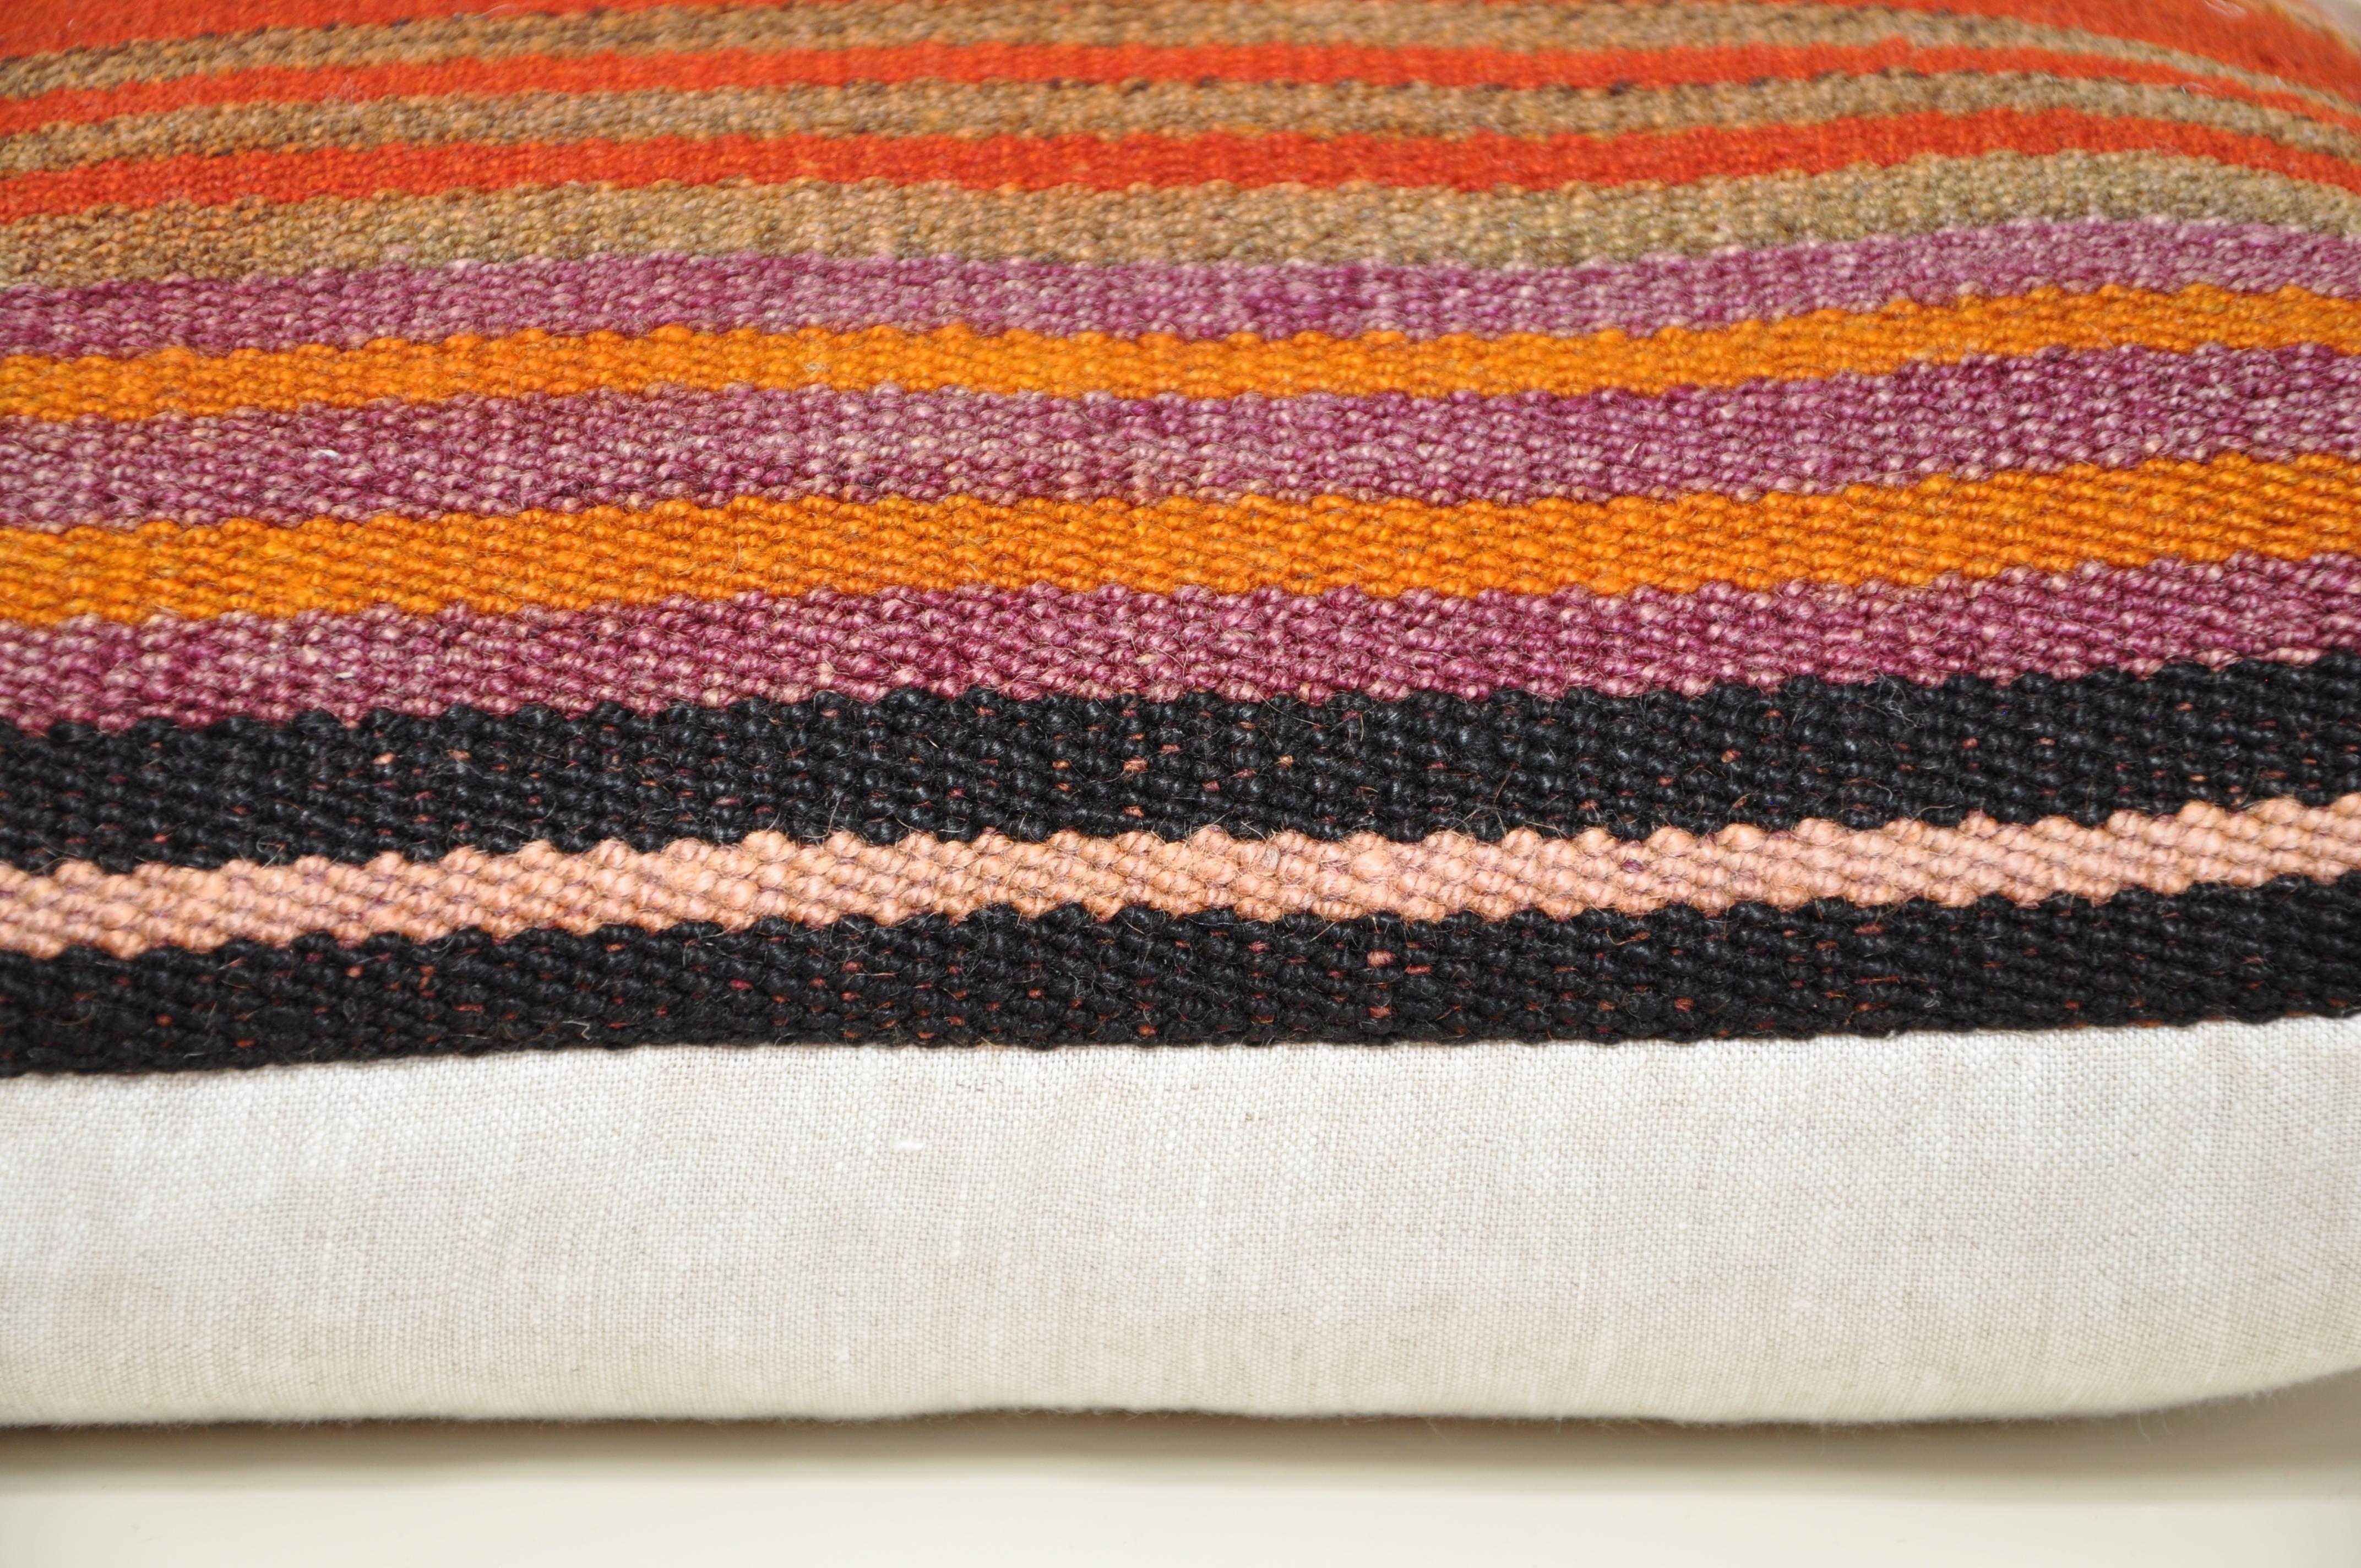 Luxury pillow created from an exquisite piece of vintage kilim rug combined with Irish Linen by Irish designer Katie Larmour. 

In rich, warm colours of orange, rust, purple, red and soft black. 

Each cushion is constructed in Ireland.
Filled with